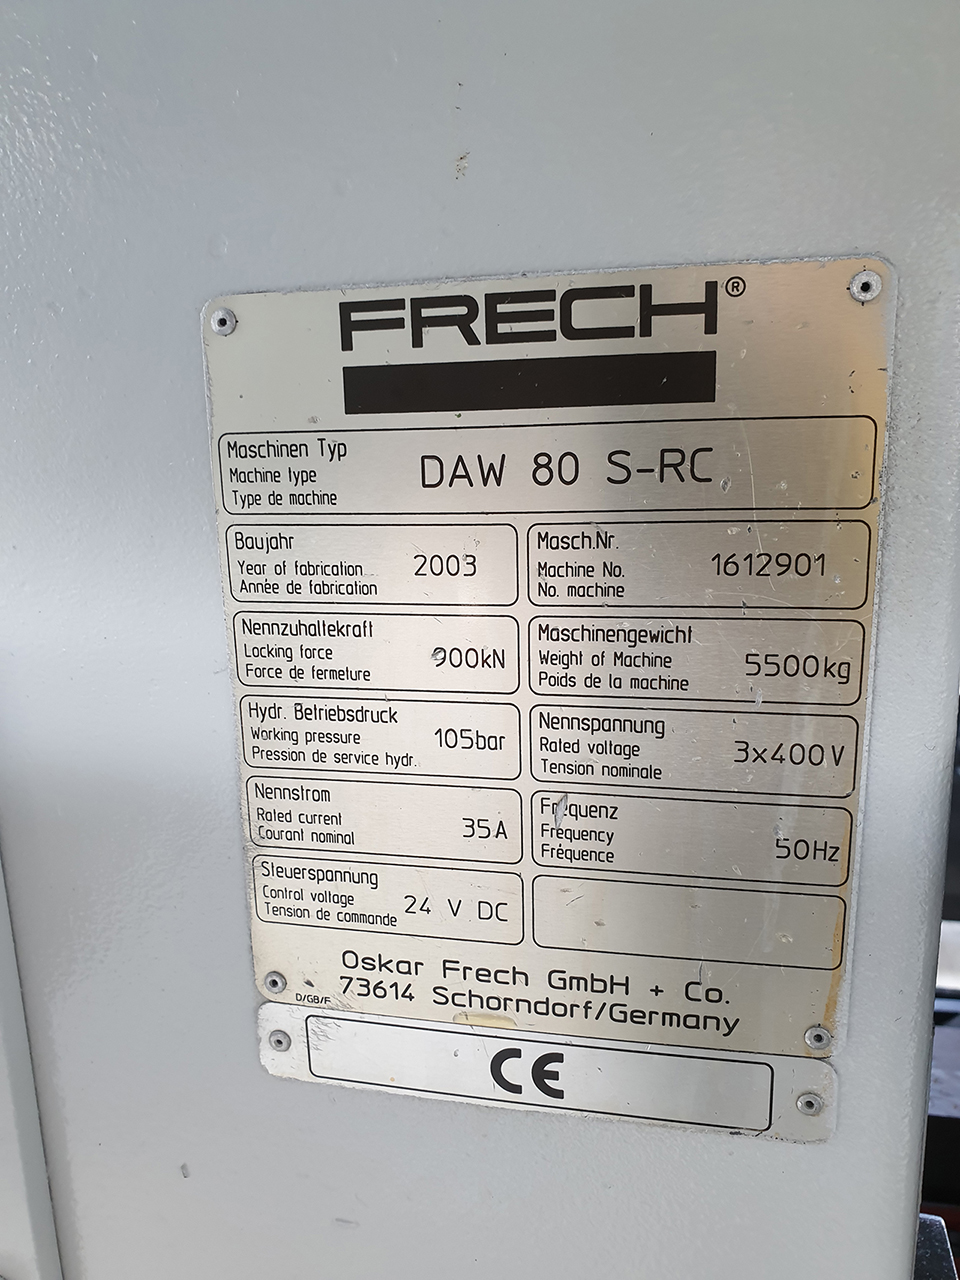 Frech DAW 80 S-RC hot chamber die casting machine WK1409, used